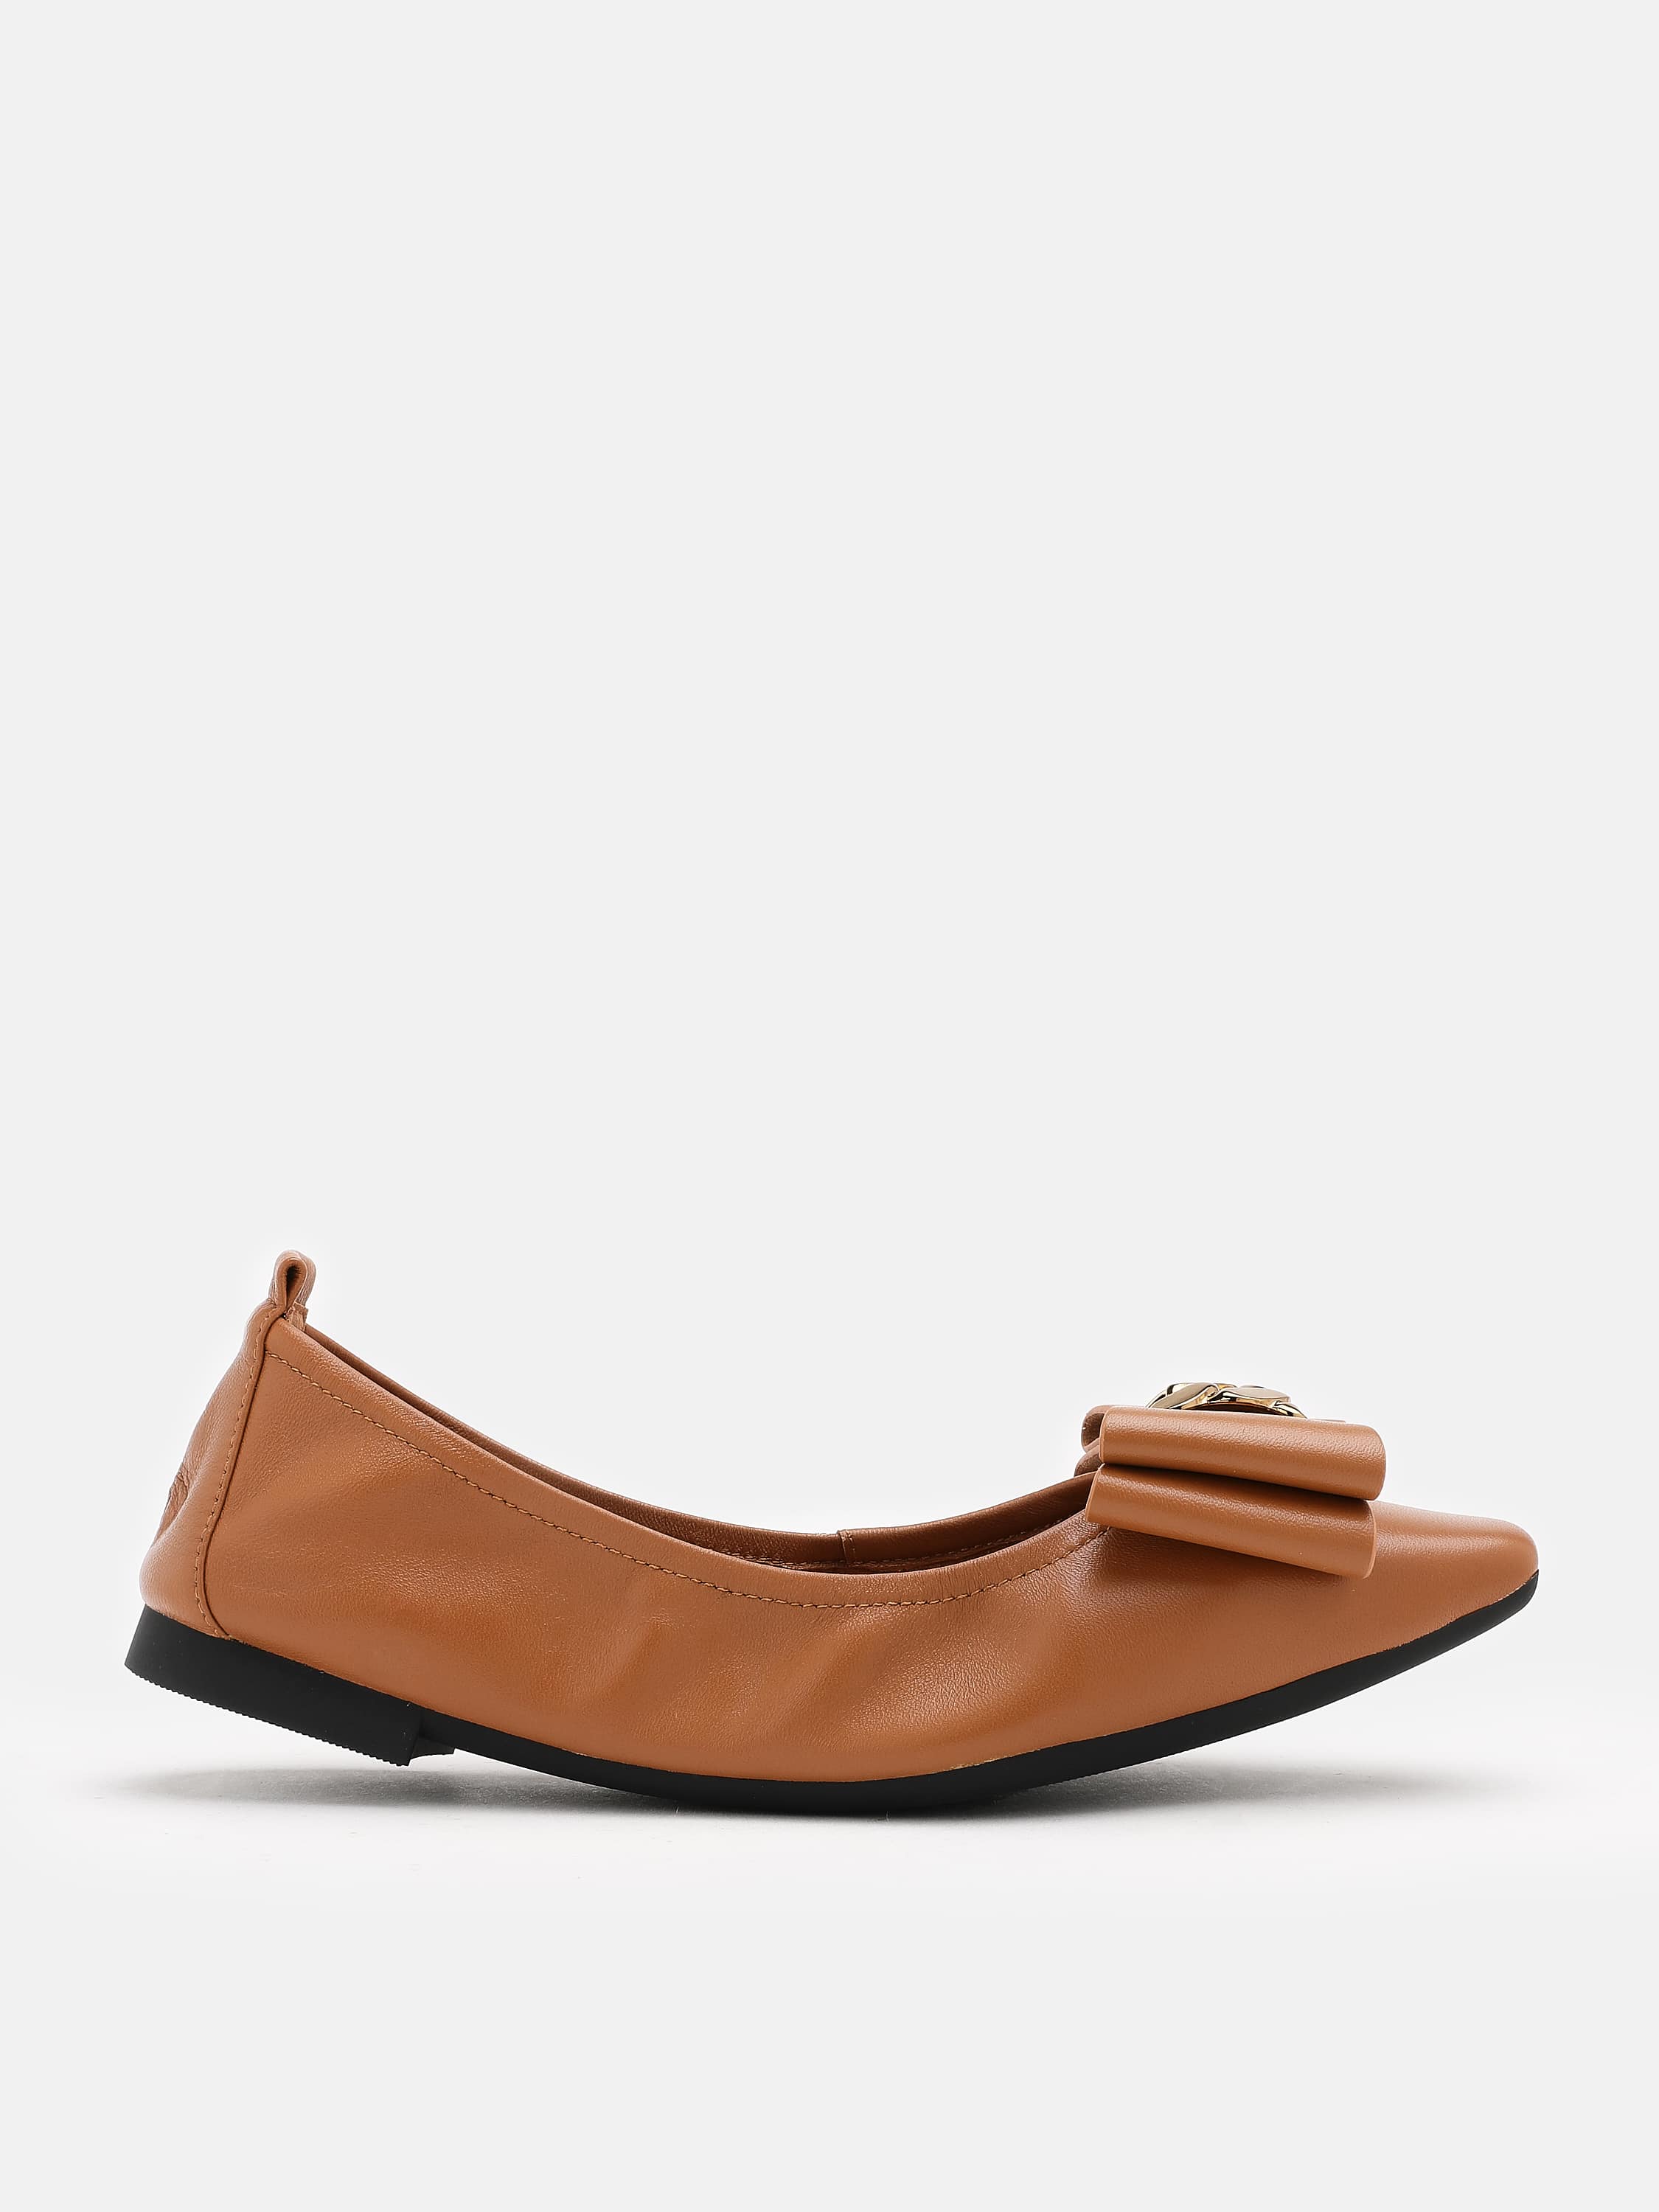 PAZZION, Candace Pop of Bow Square Toe Flats, Camel